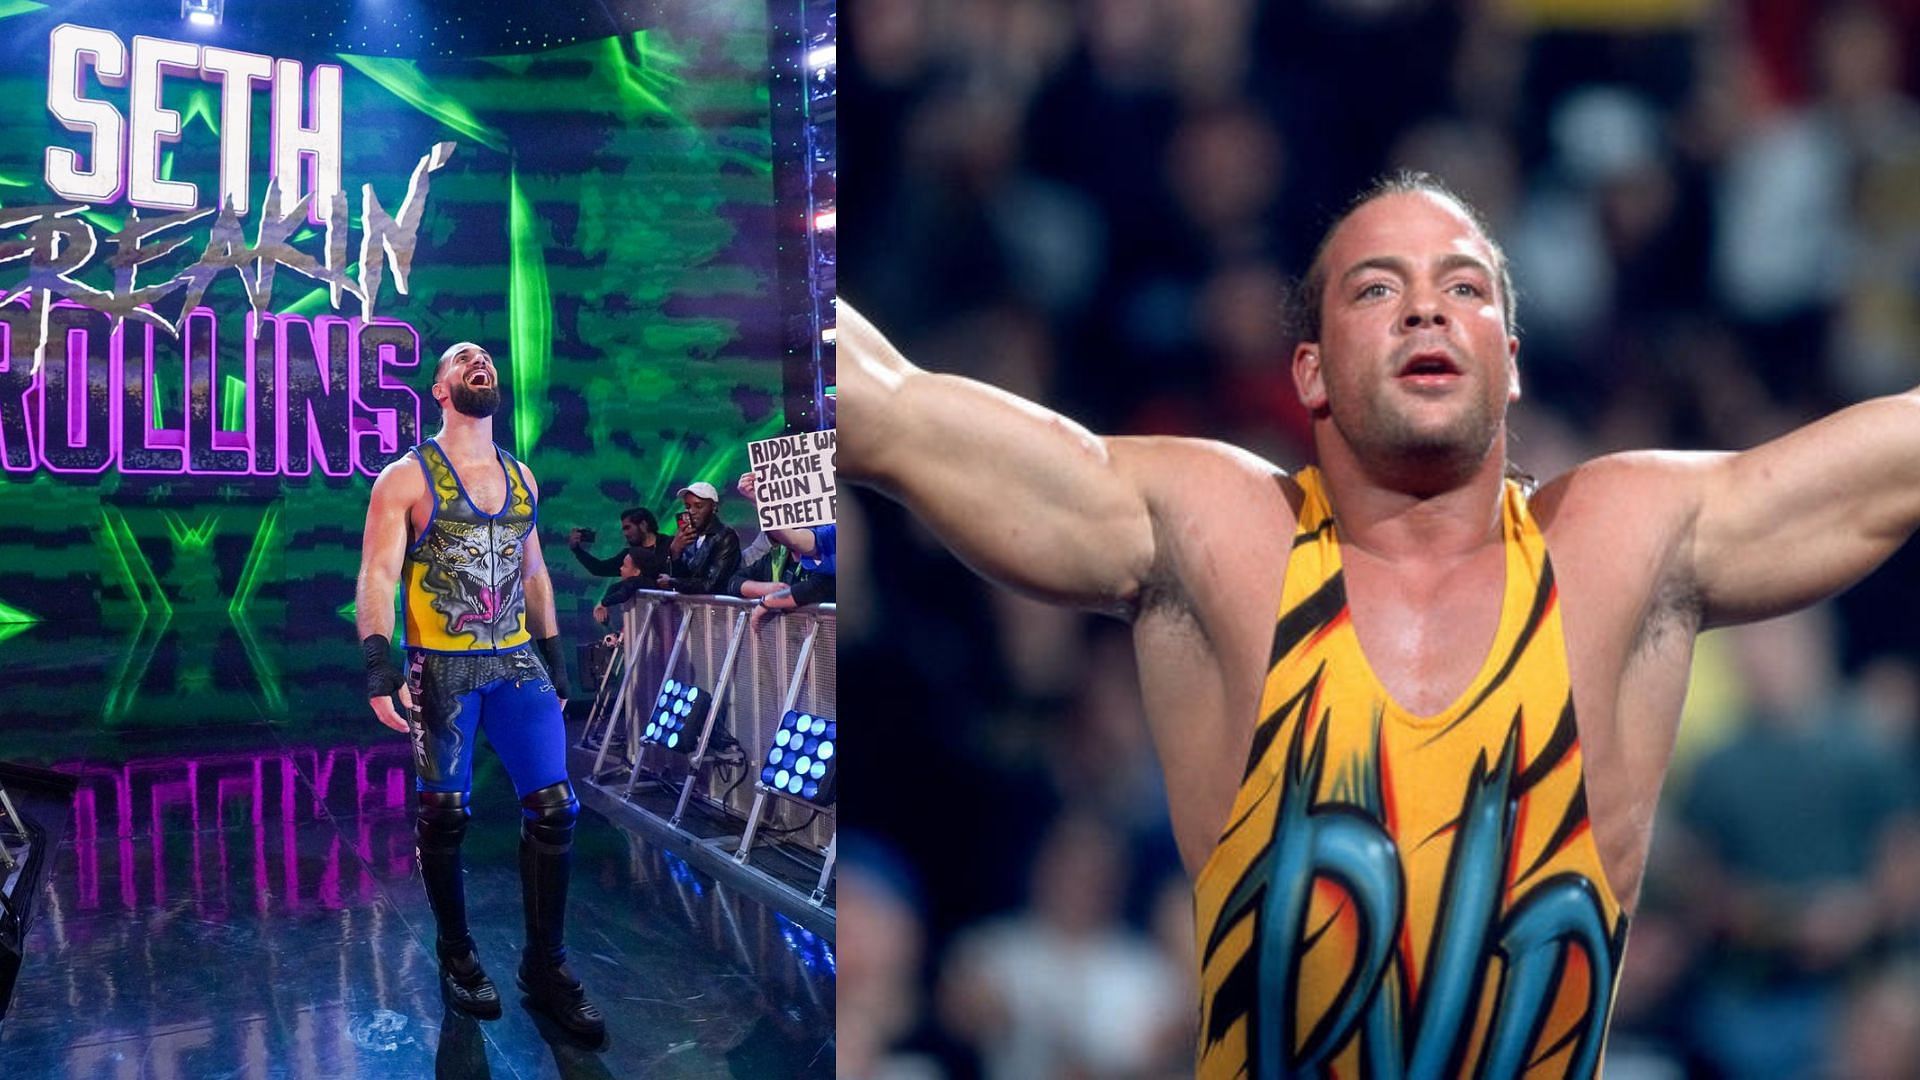 Seth Rollins and Rob Van Dam are similar in many ways.